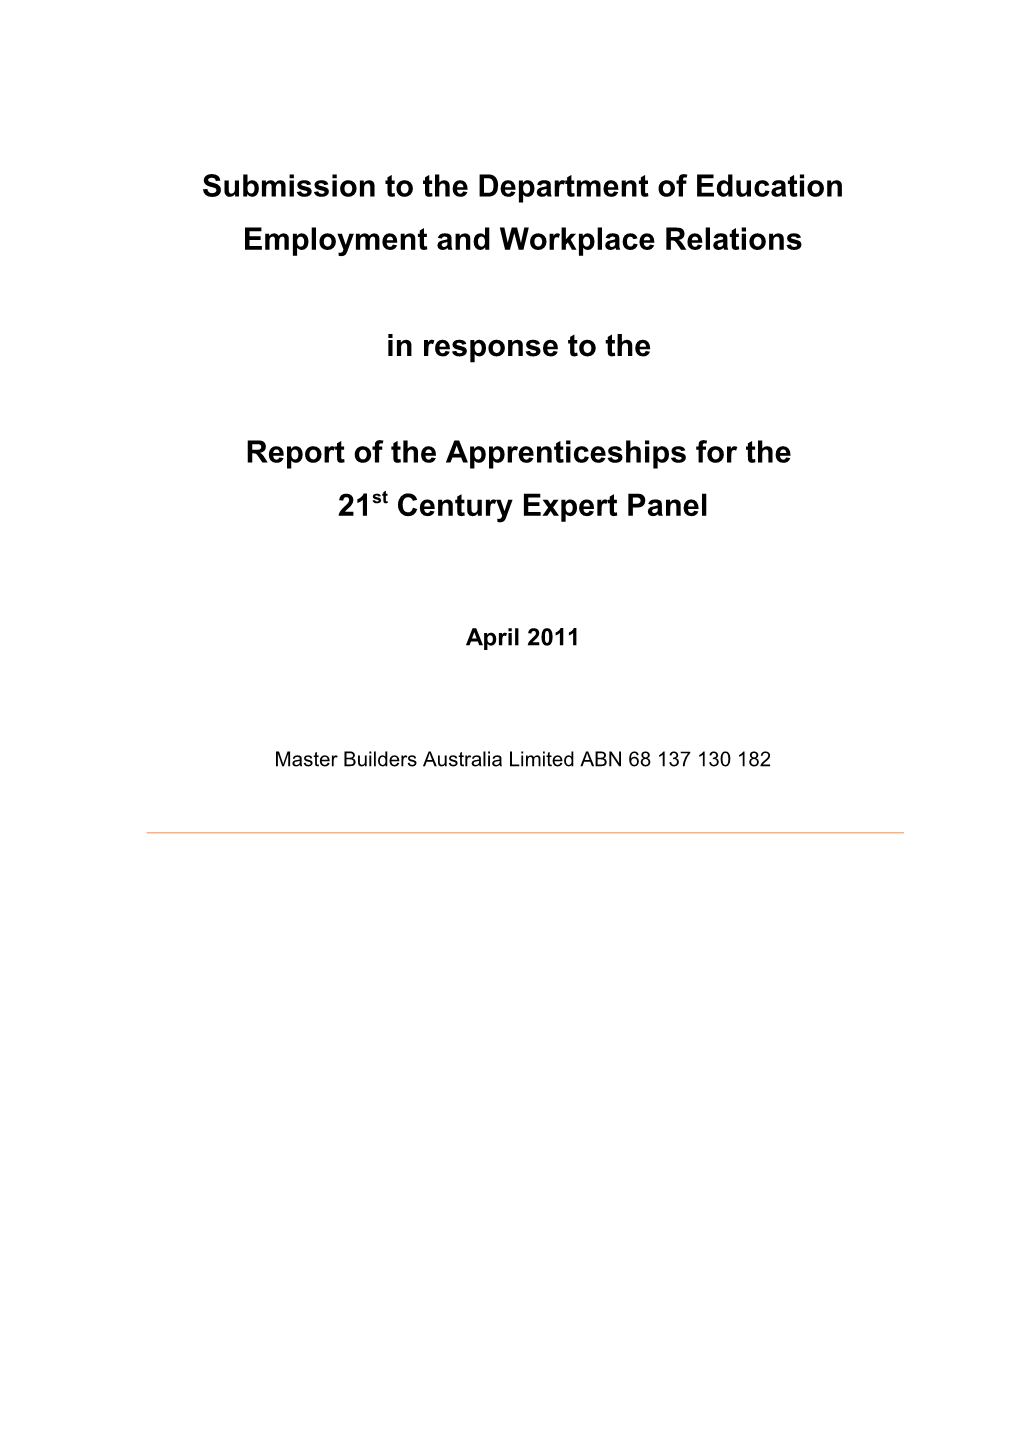 Submission to the Department of Education Employment and Workplace Relations